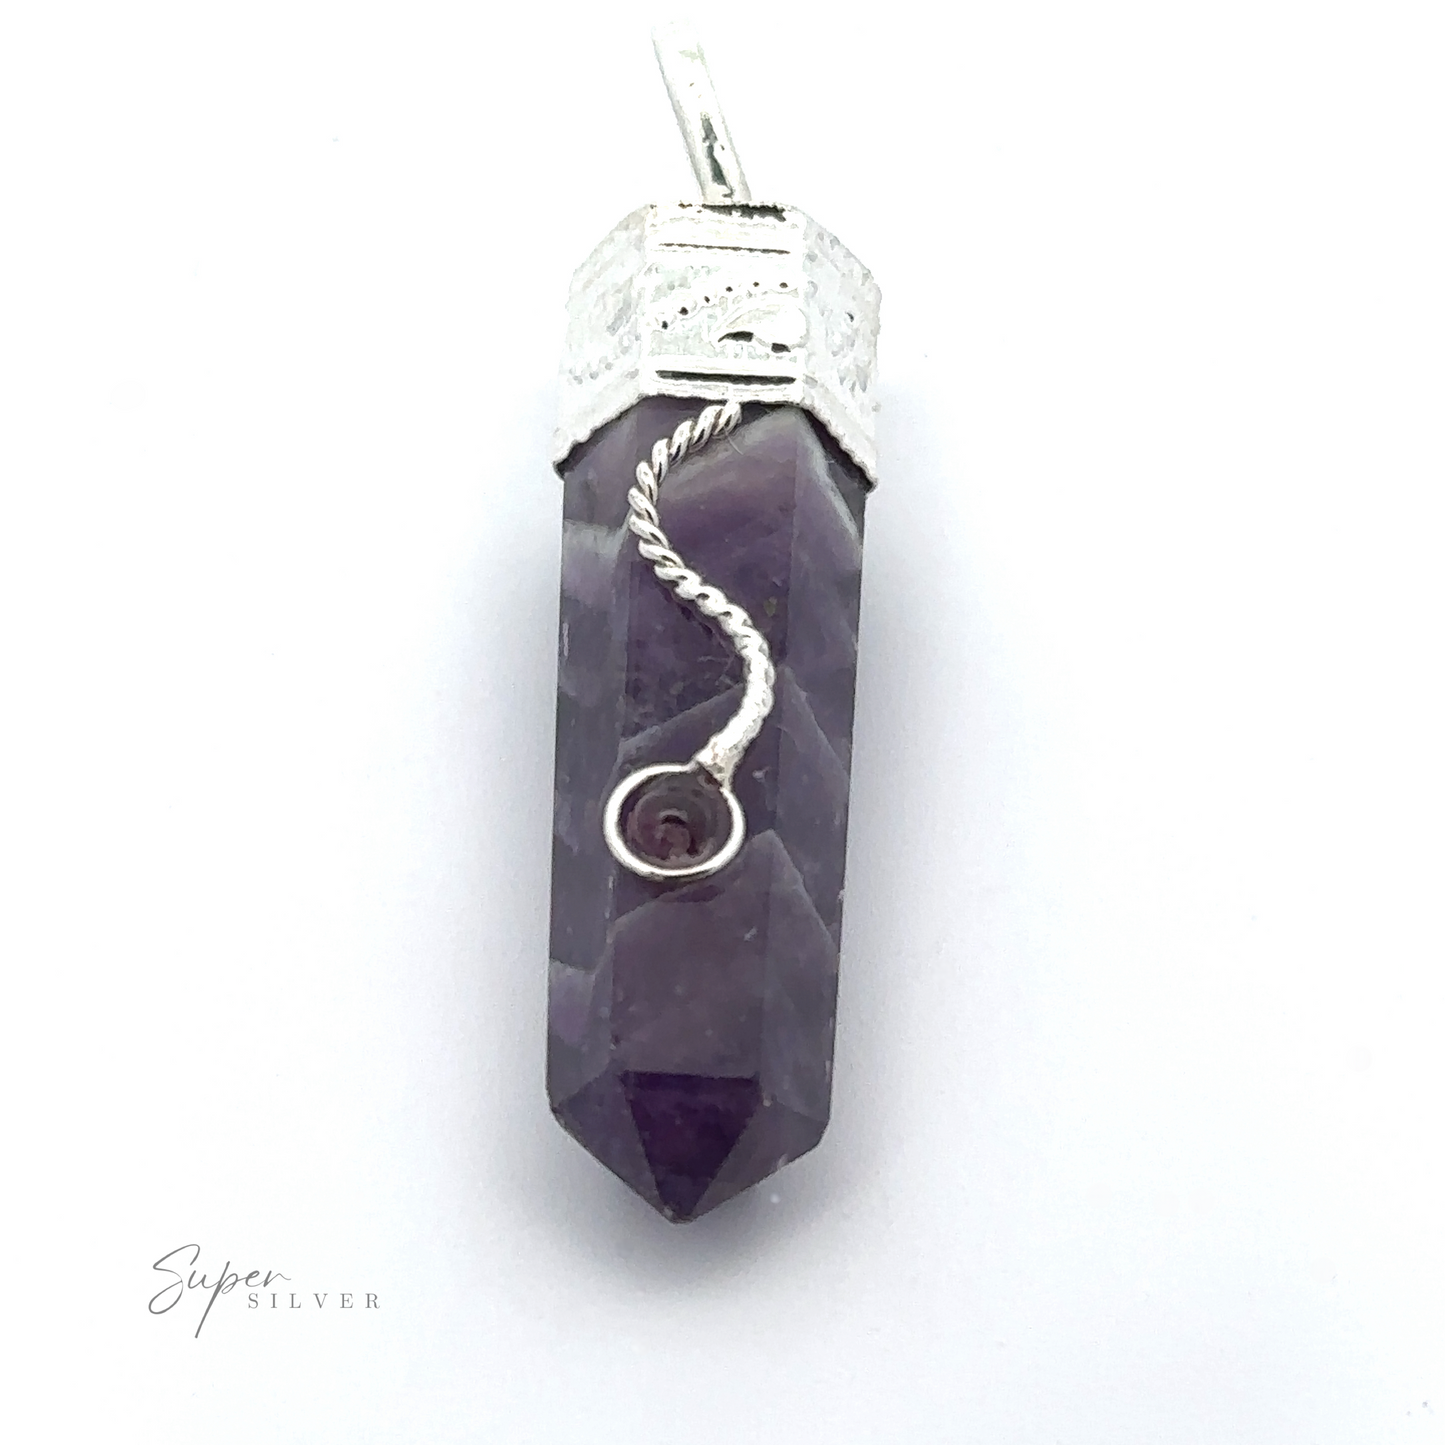 
                  
                    A stunning Crystal Pendant with Decorative Bail set in a silver cap and a twisted silver wire detail. "Super Silver" is written at the bottom left.
                  
                